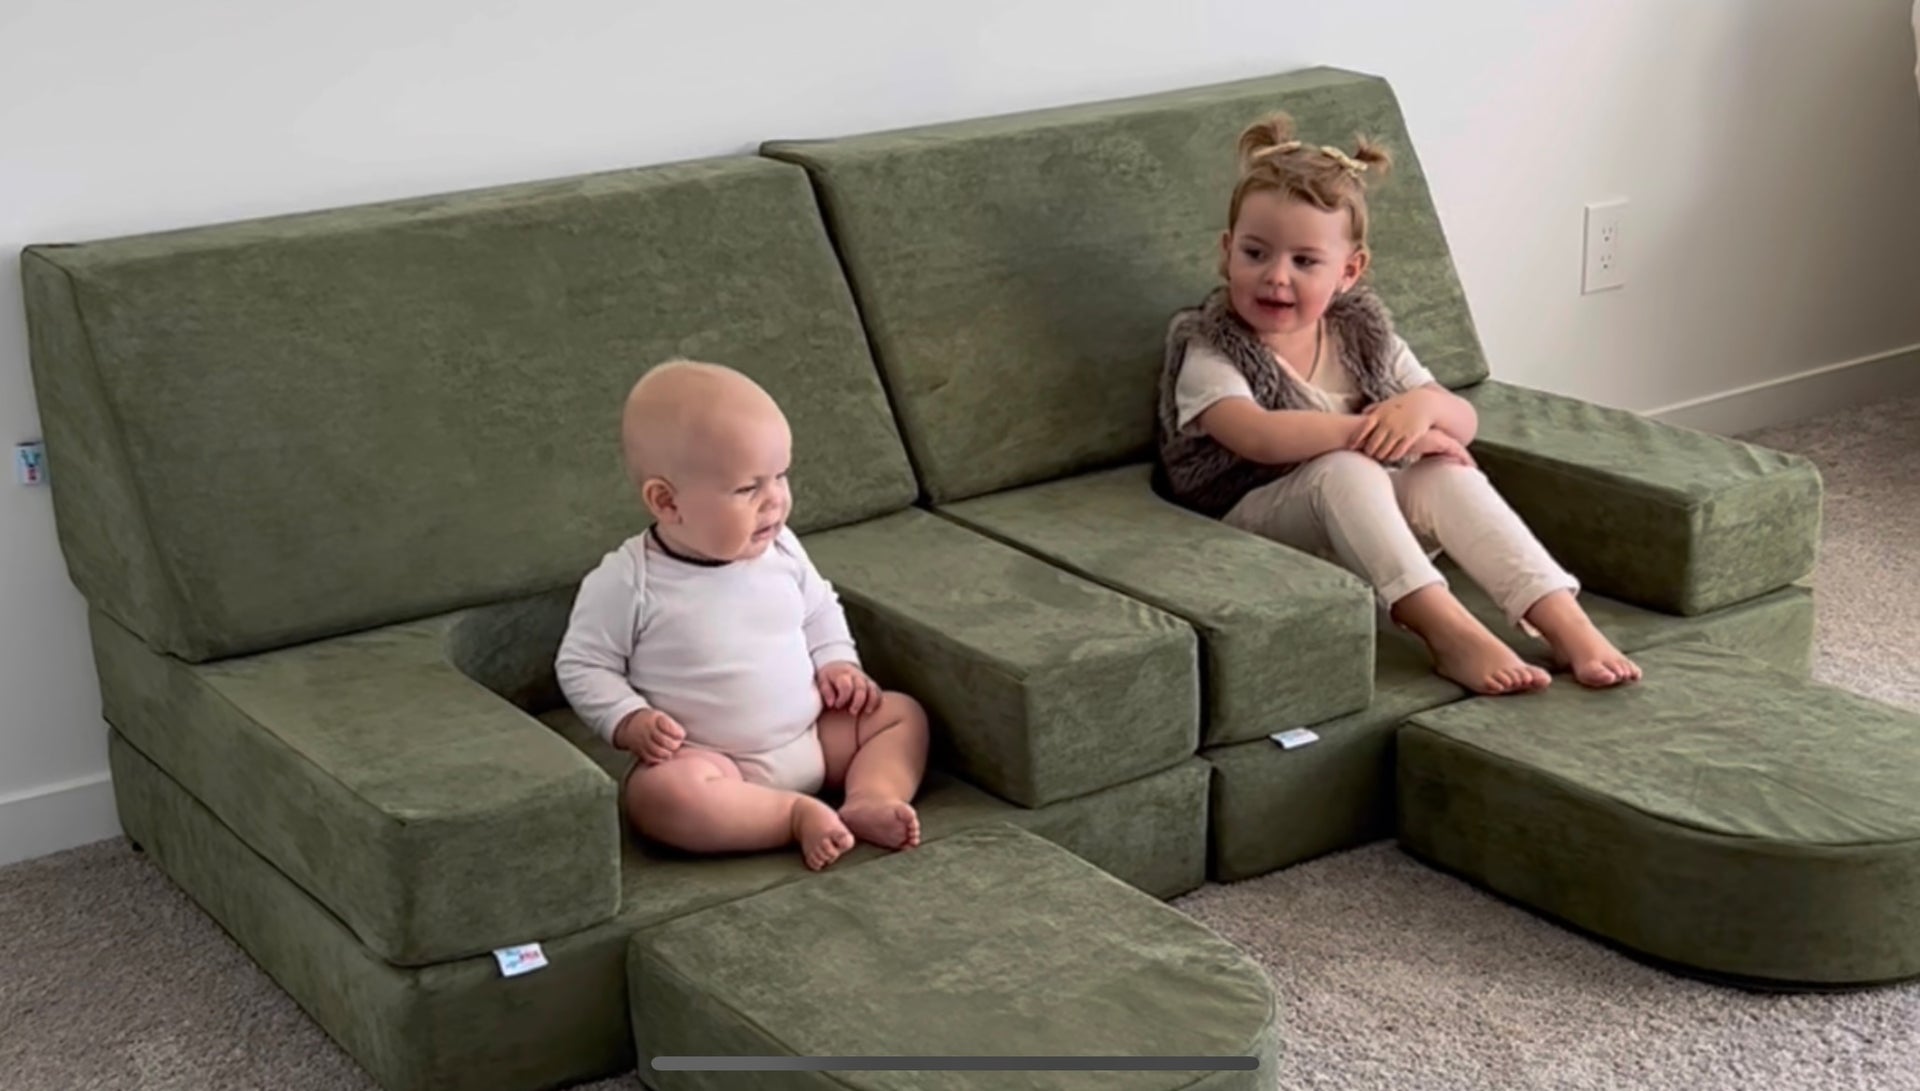 Unboxing Your Play Couch